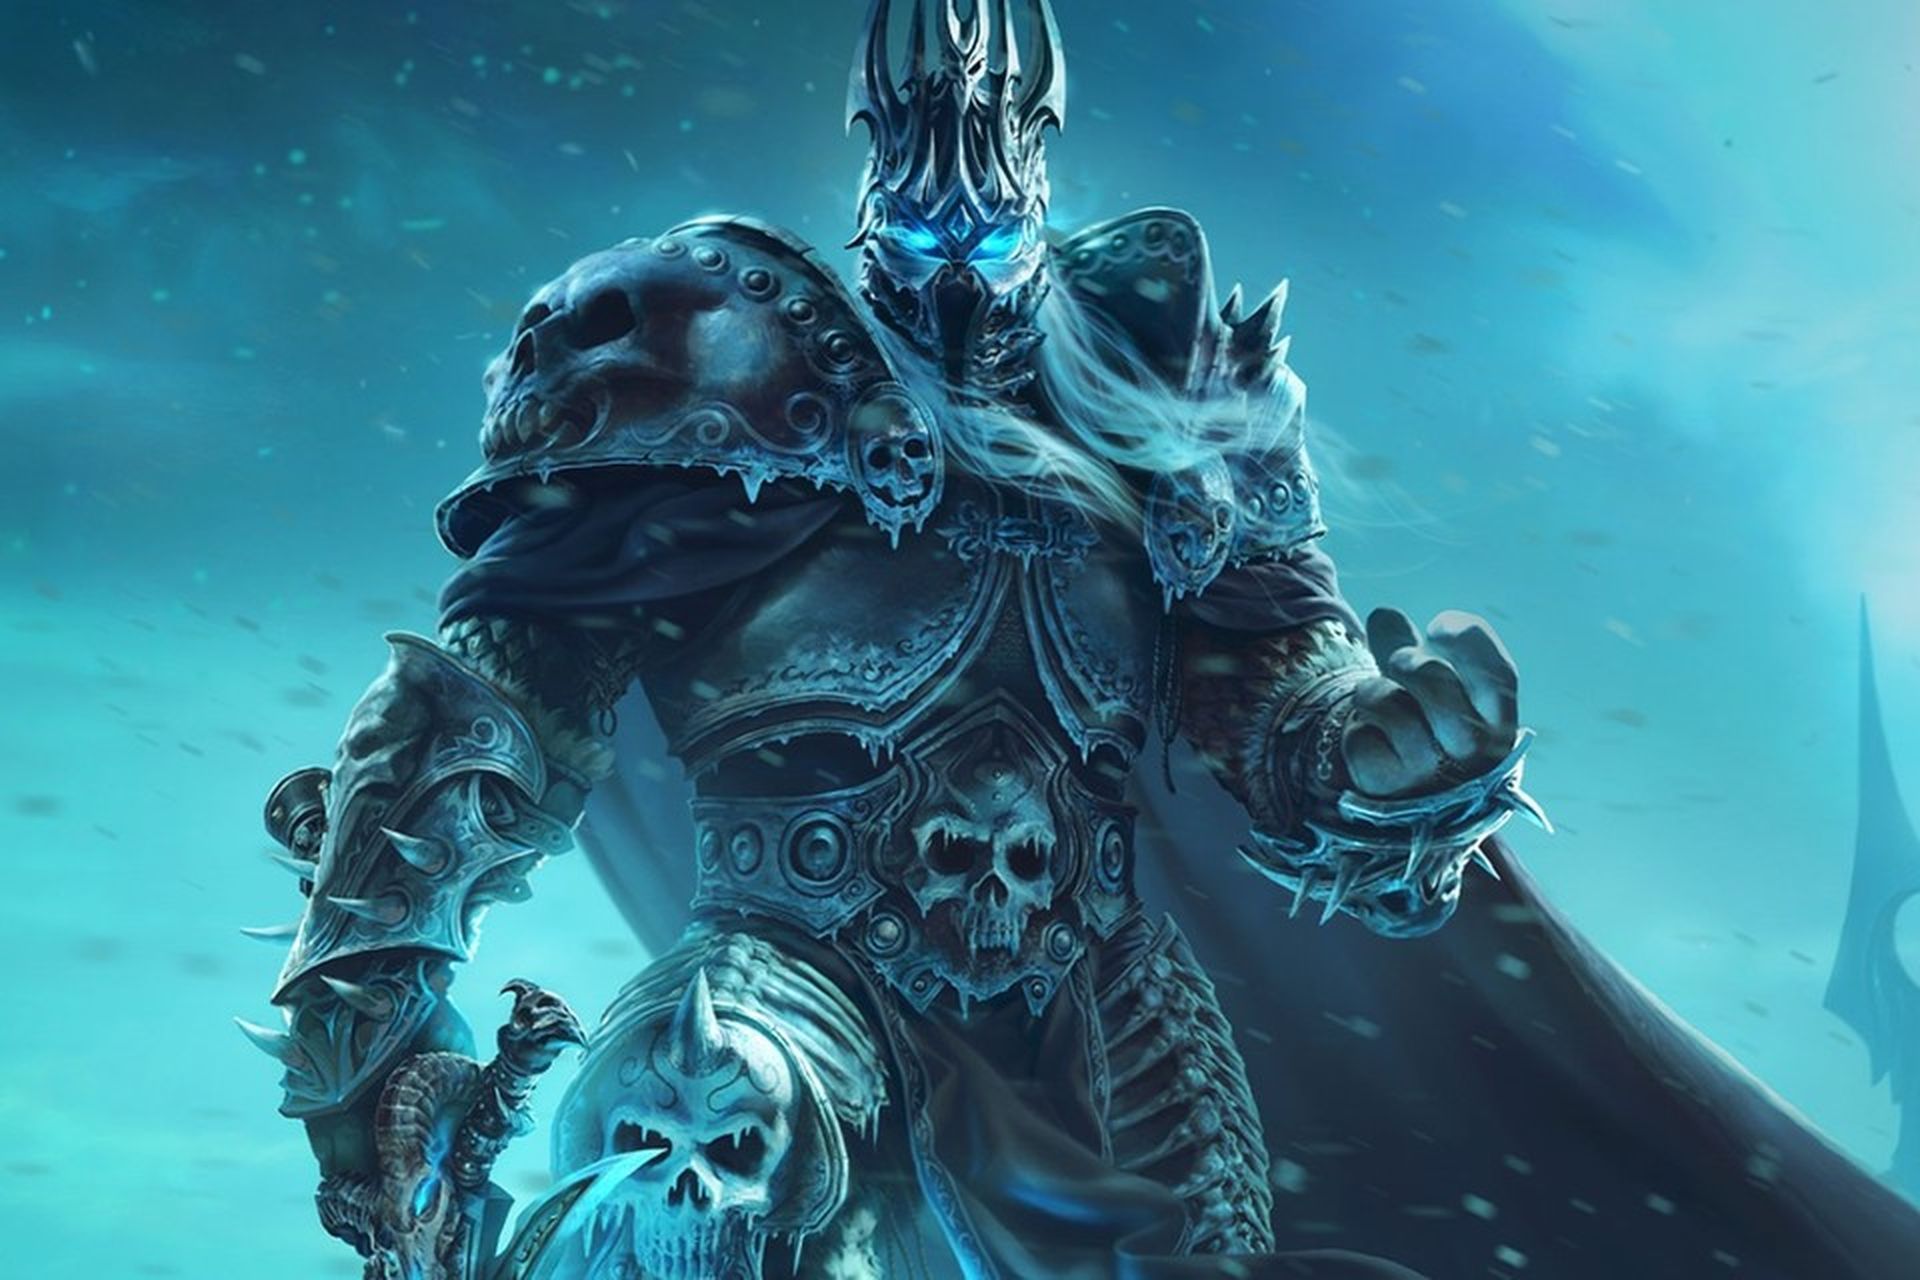 If you are excited about the release of the Wrath of the Lich King but don't know where or how to start mining, our WotLK mining guide is just the thing you...